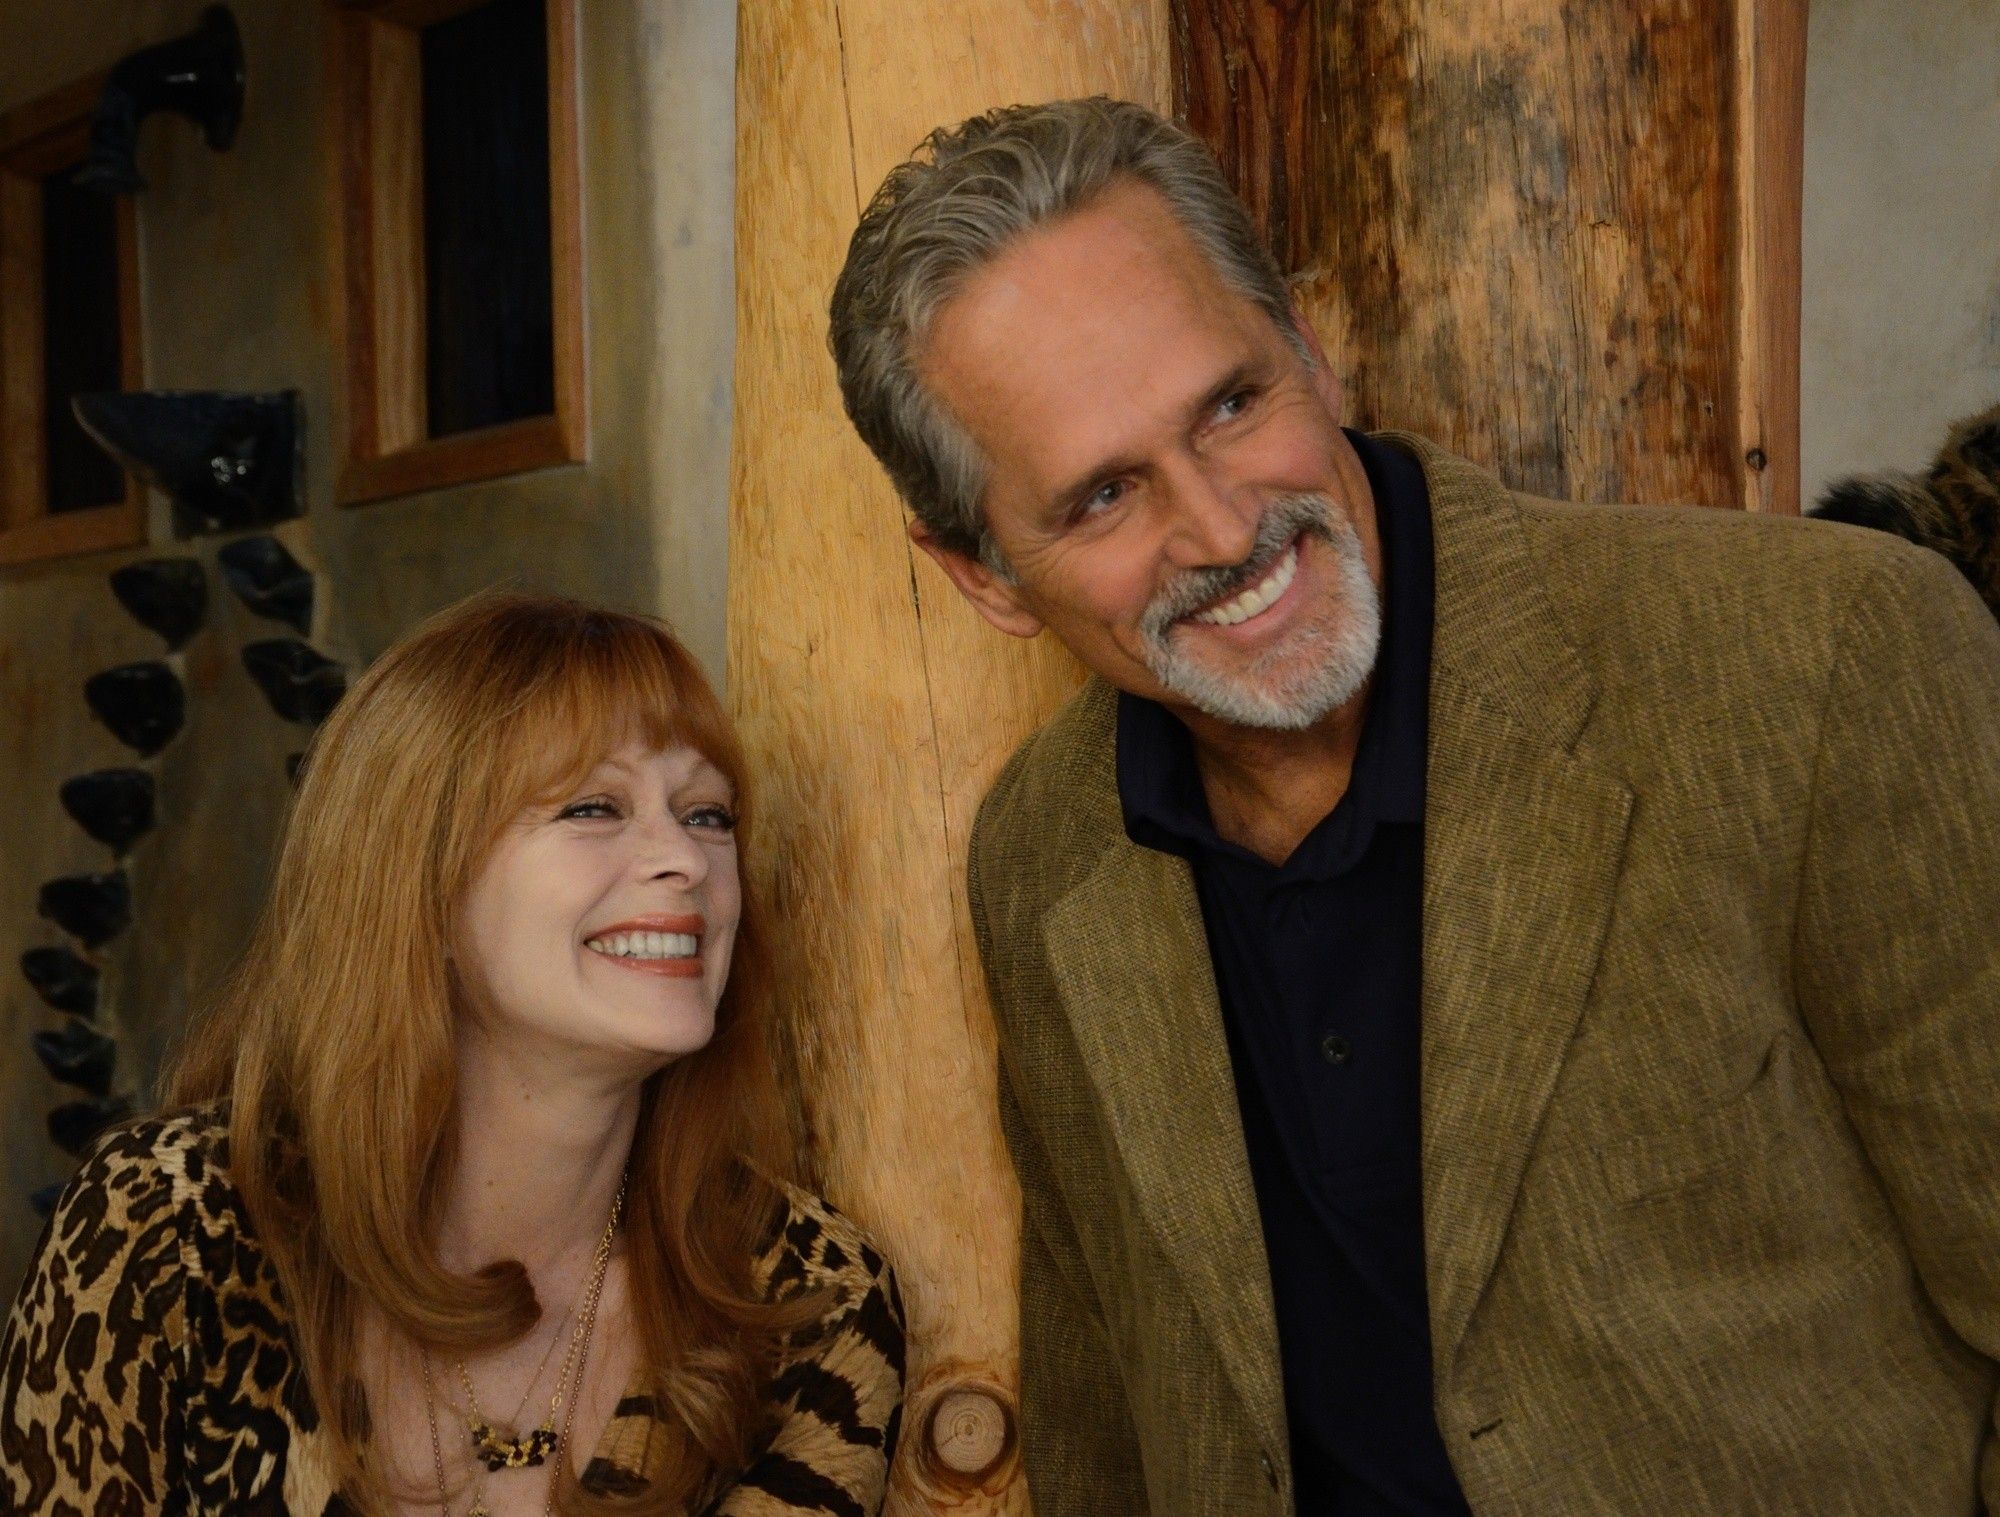 Frances Fisher stars as Carson Riley and Gregory Harrison stars as Mack Riley in A Rainbow Film's The M Word (2014)